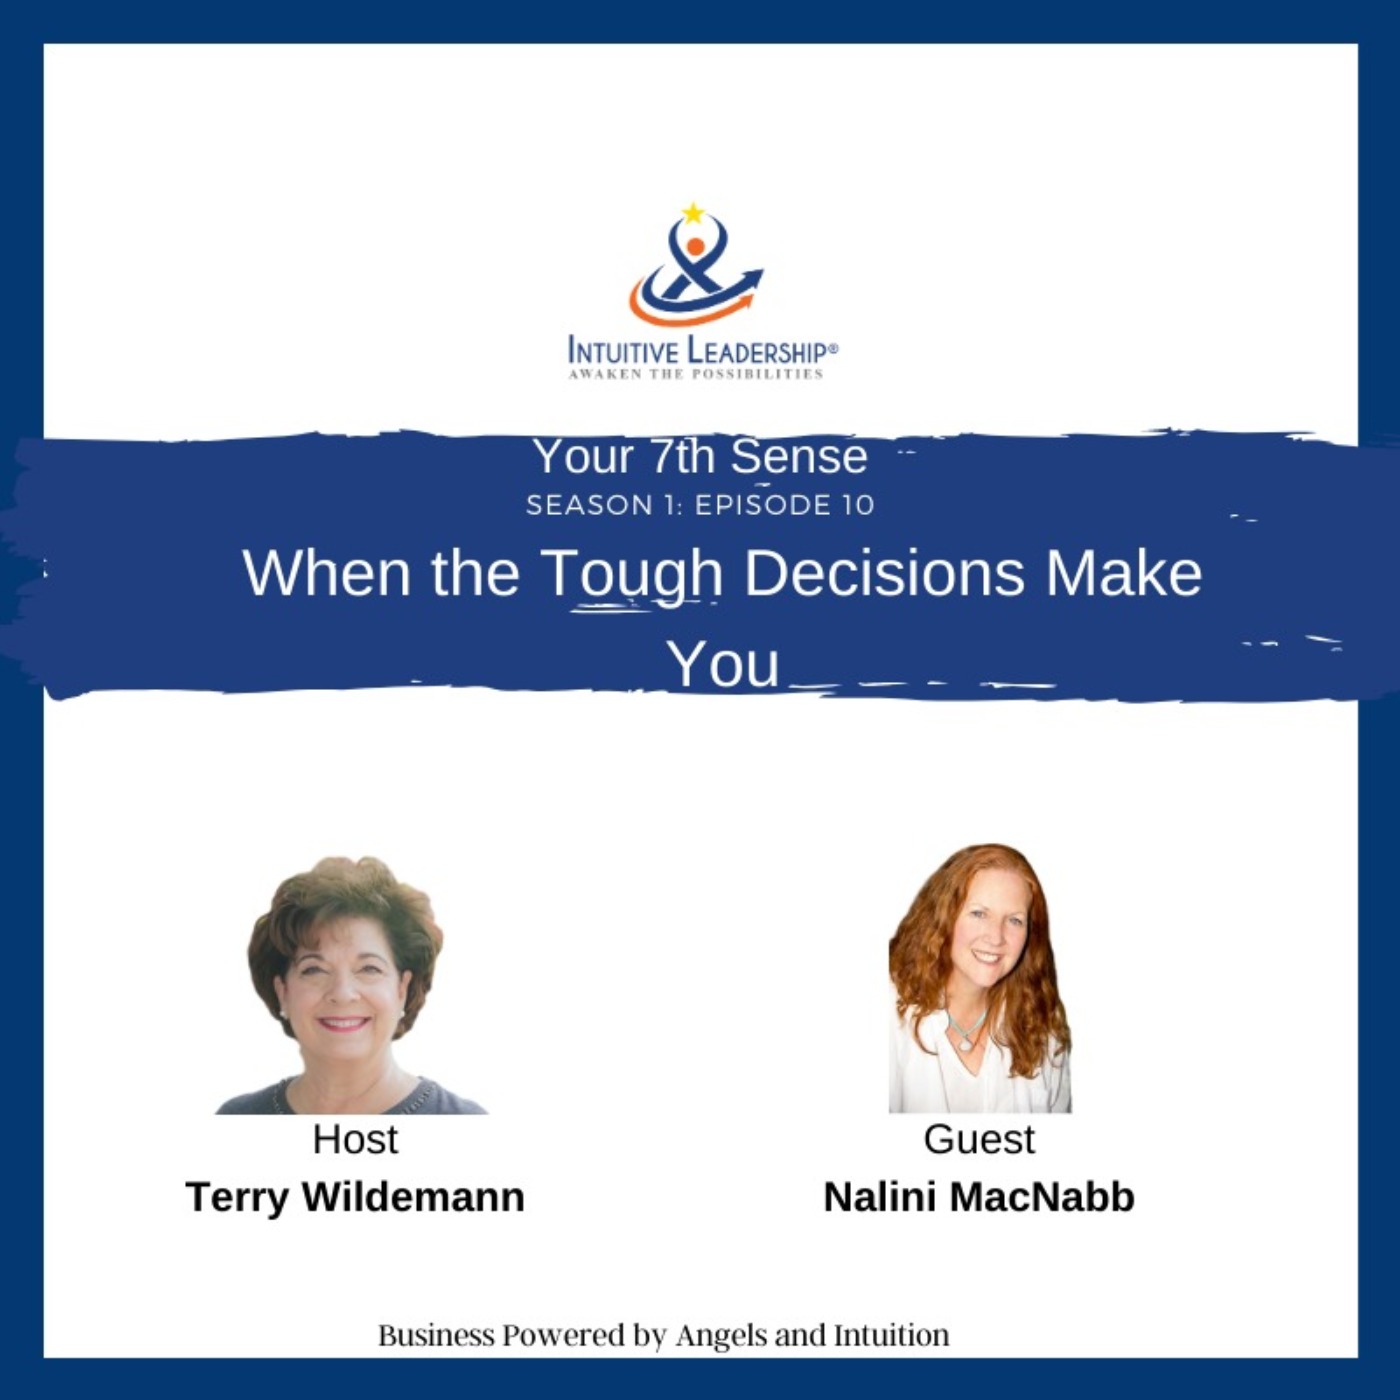 Your 7th Sense: When the Tough Decisions Make You (and not the other way around)